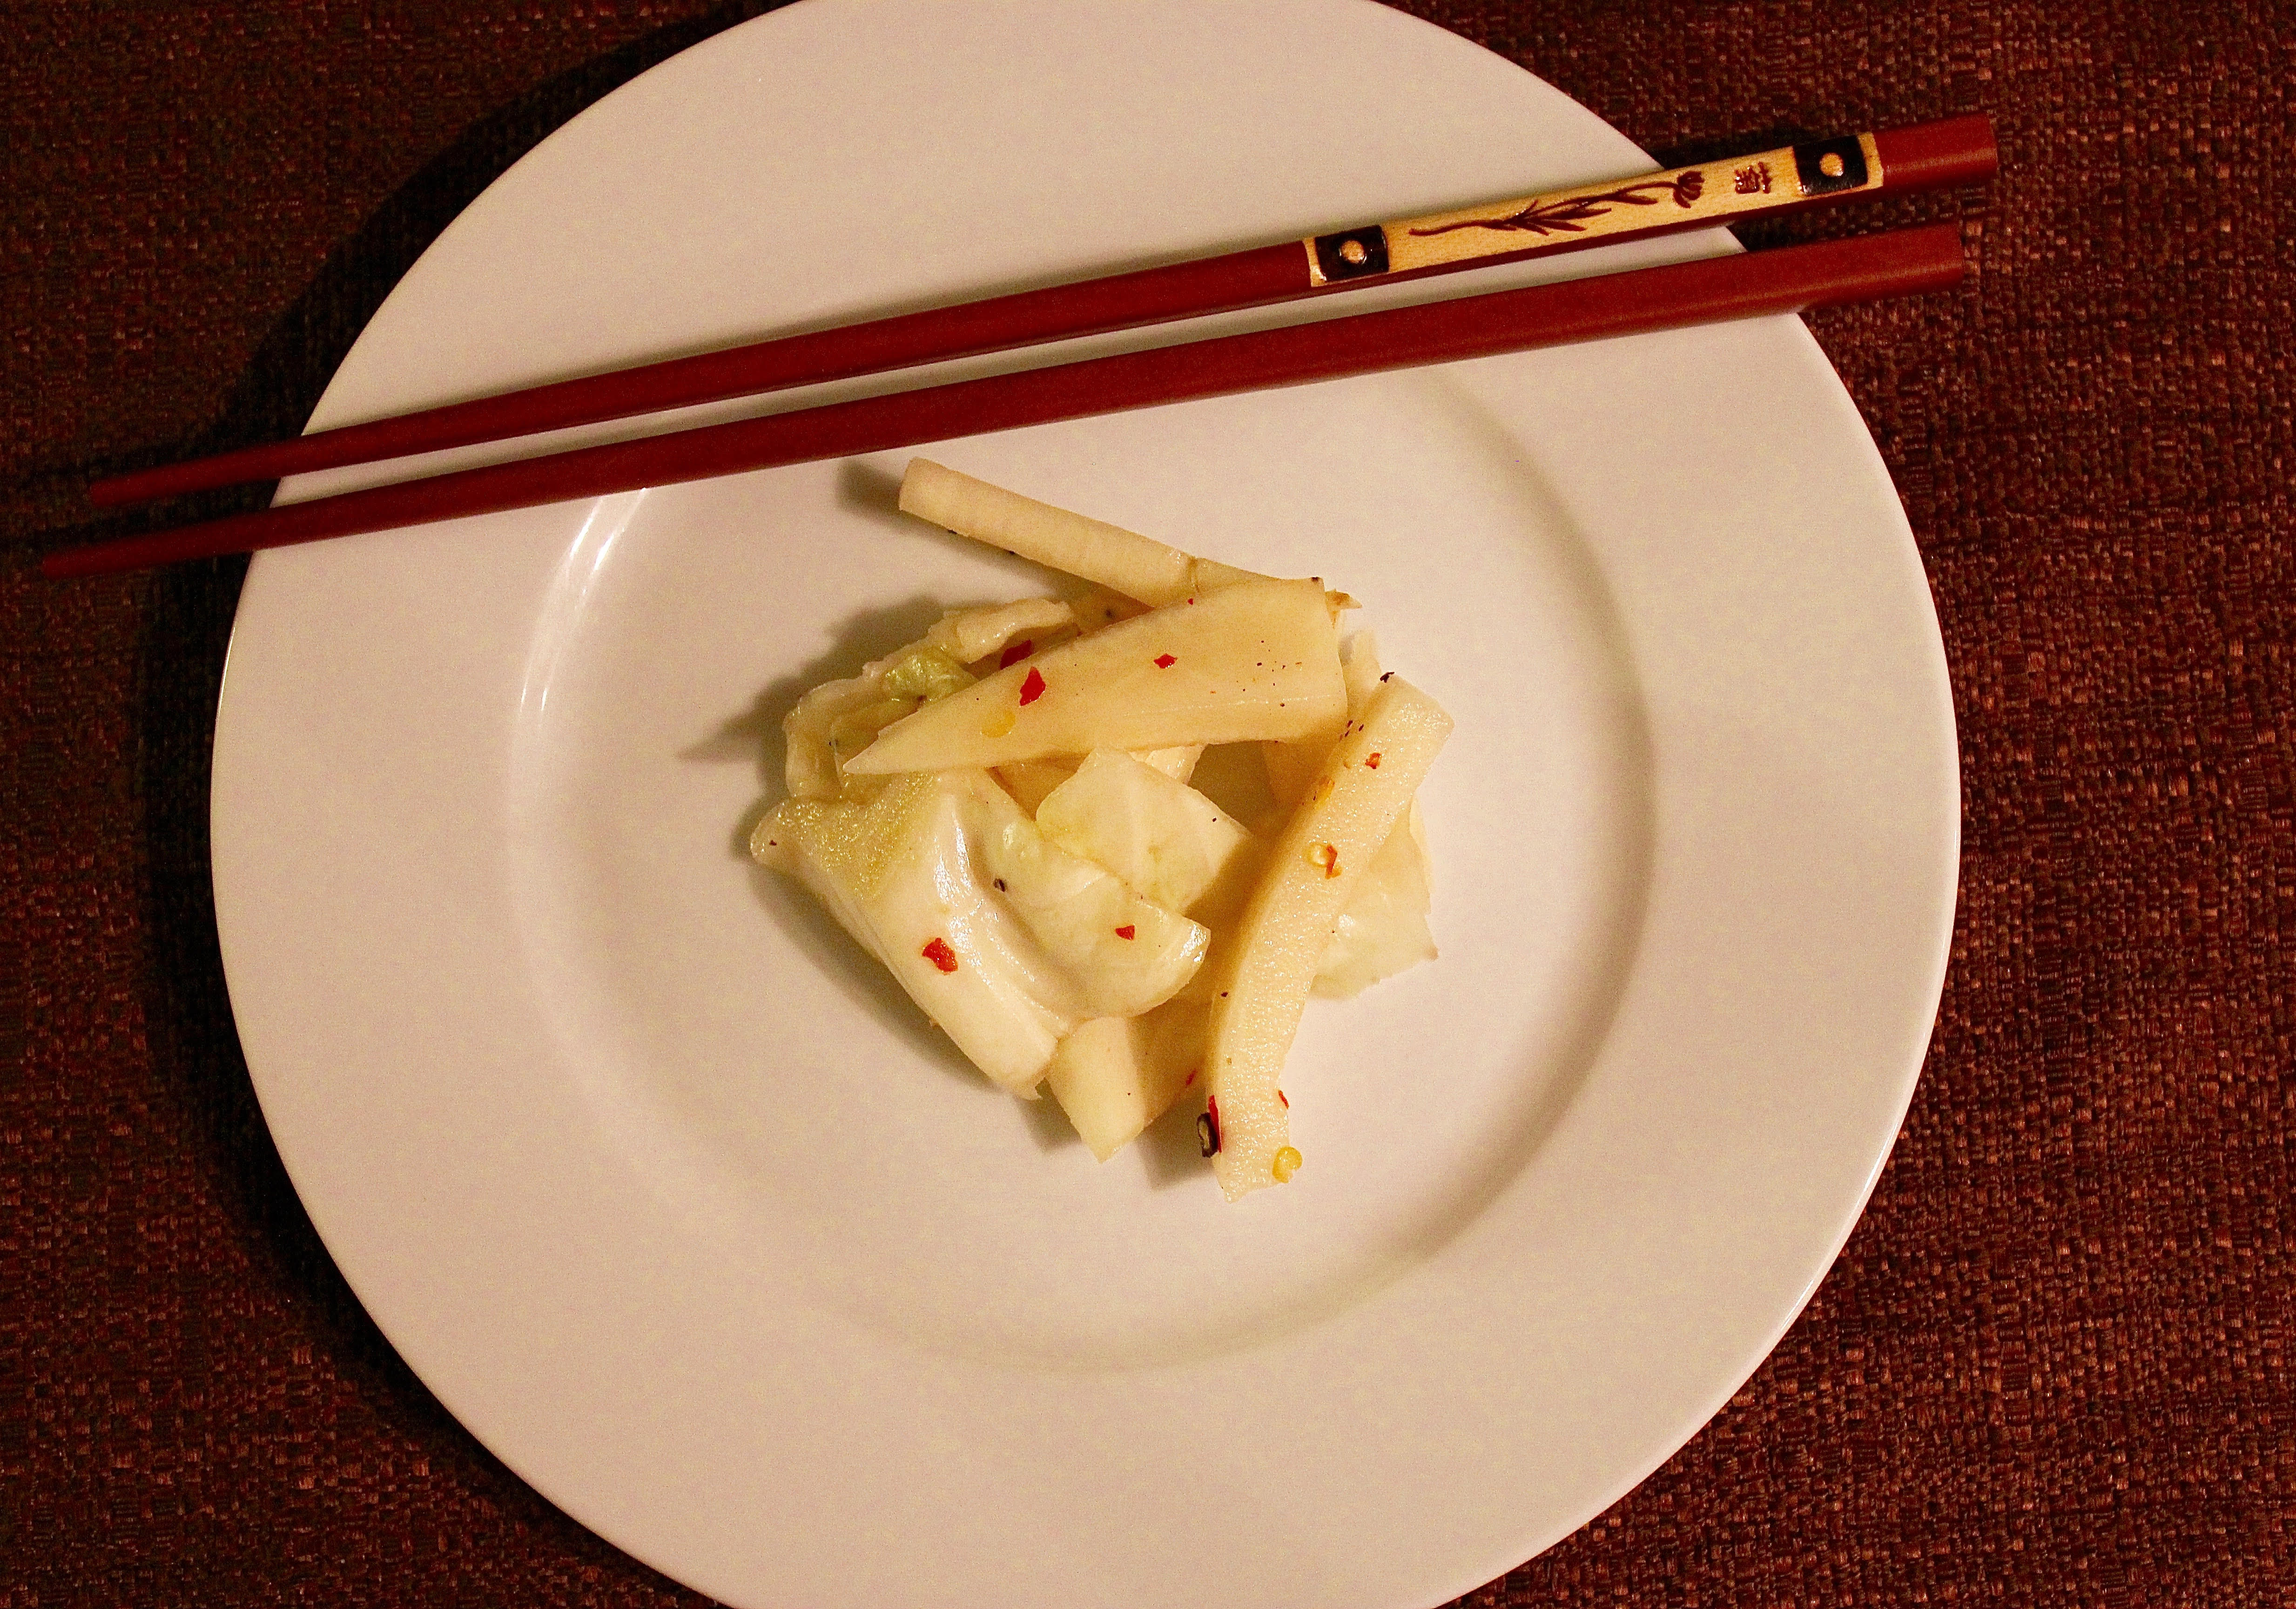 Dikon vegetable and cabbage, after pickling, in the center of a white plate on a brown background, with a pair of deep red chopsticks across the top of the plate.